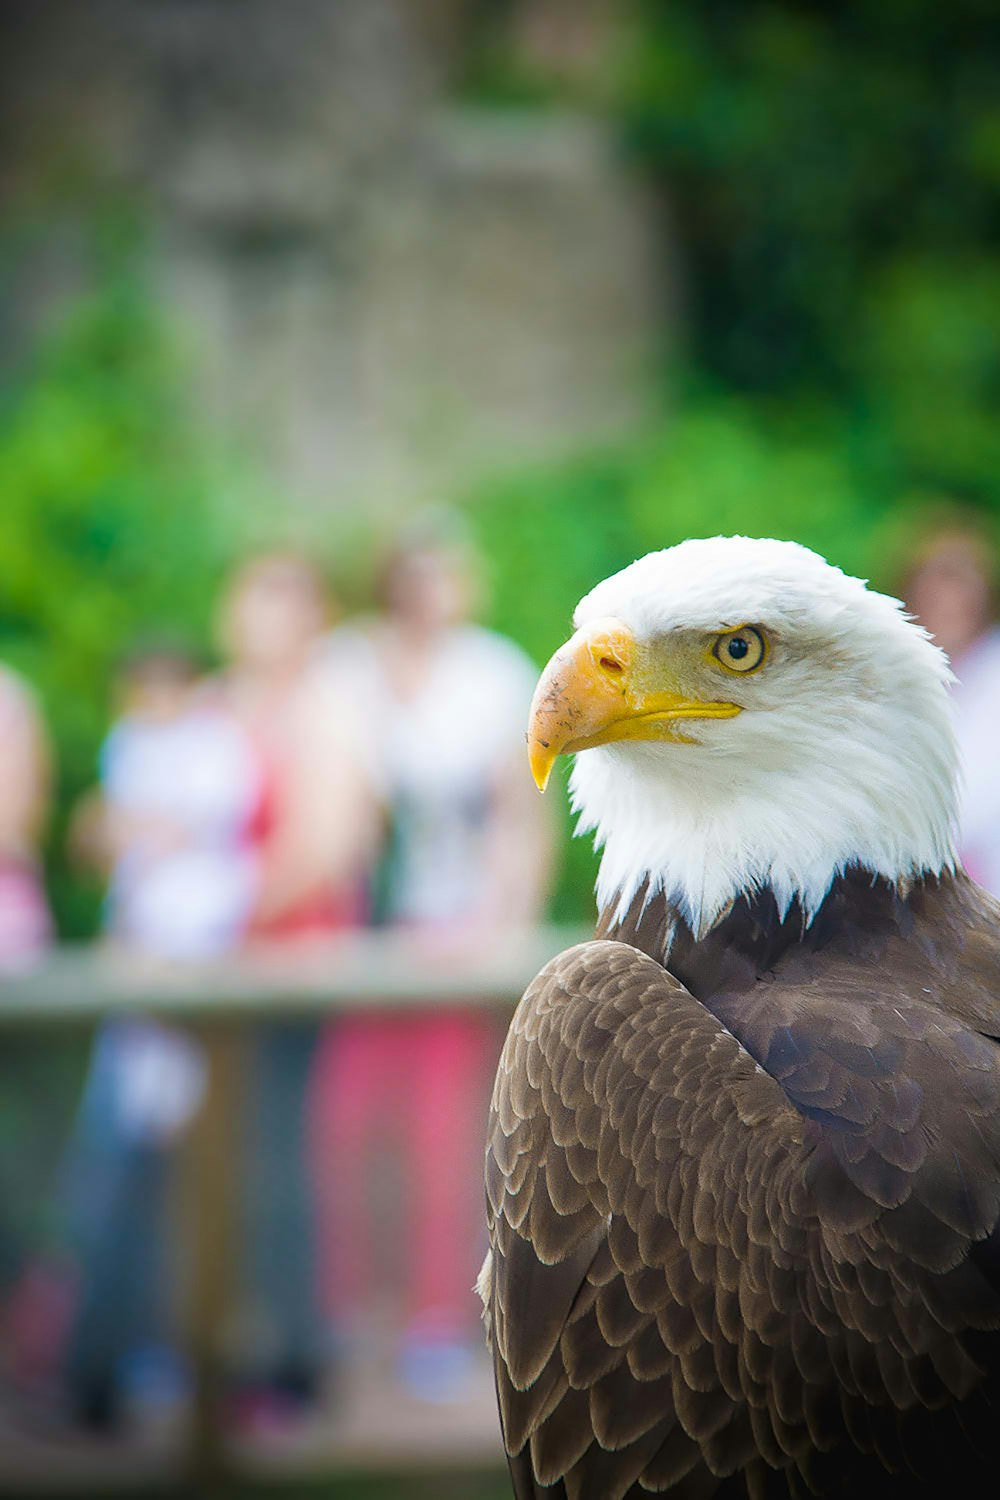 a bald eagle with a large white head and yellow beak